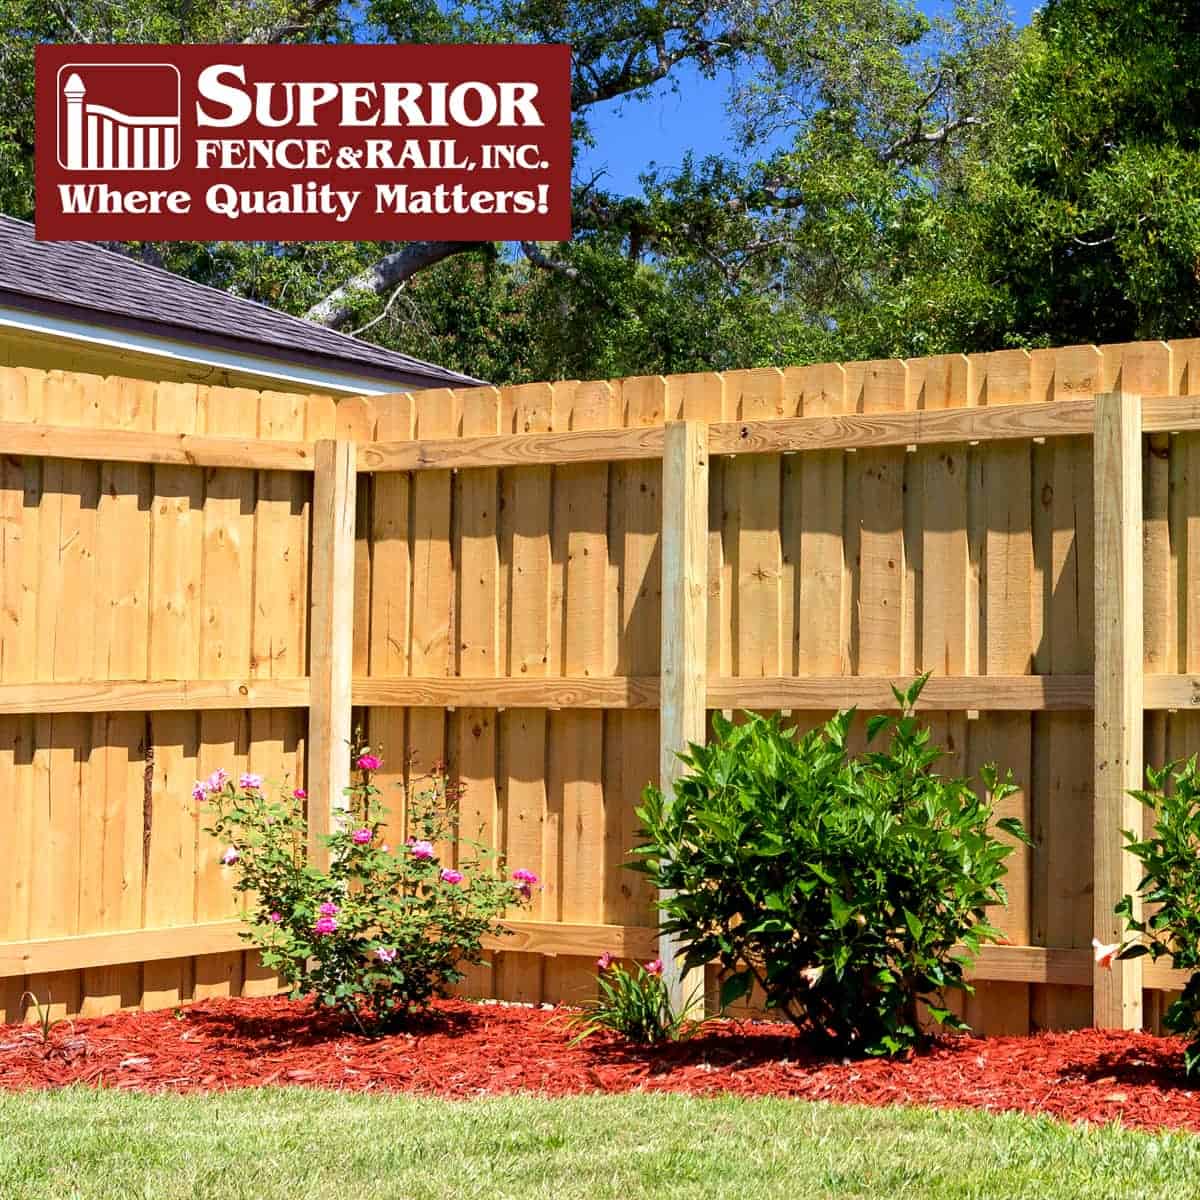 Issaquah fence company contractor